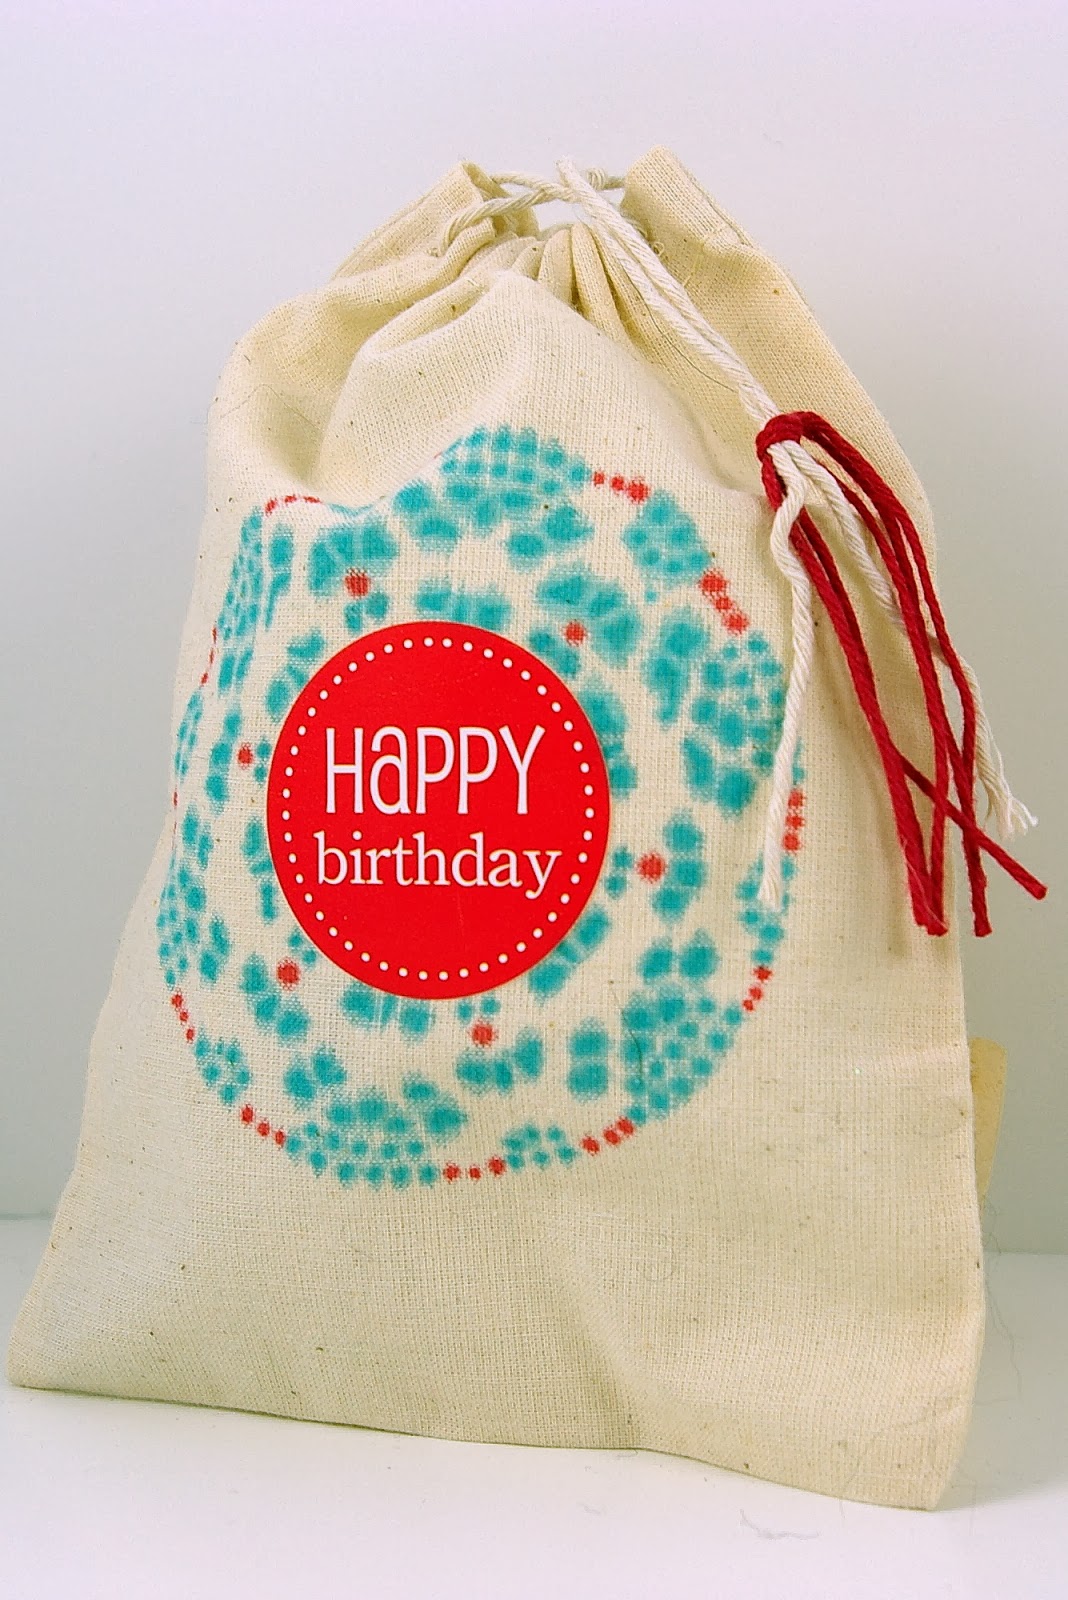 SRM Stickers Blog - Doily Stenciled Birthday Bag by Michelle - #birthday #card #doilies #gift #bag #muslin #twine #gift #stencil 